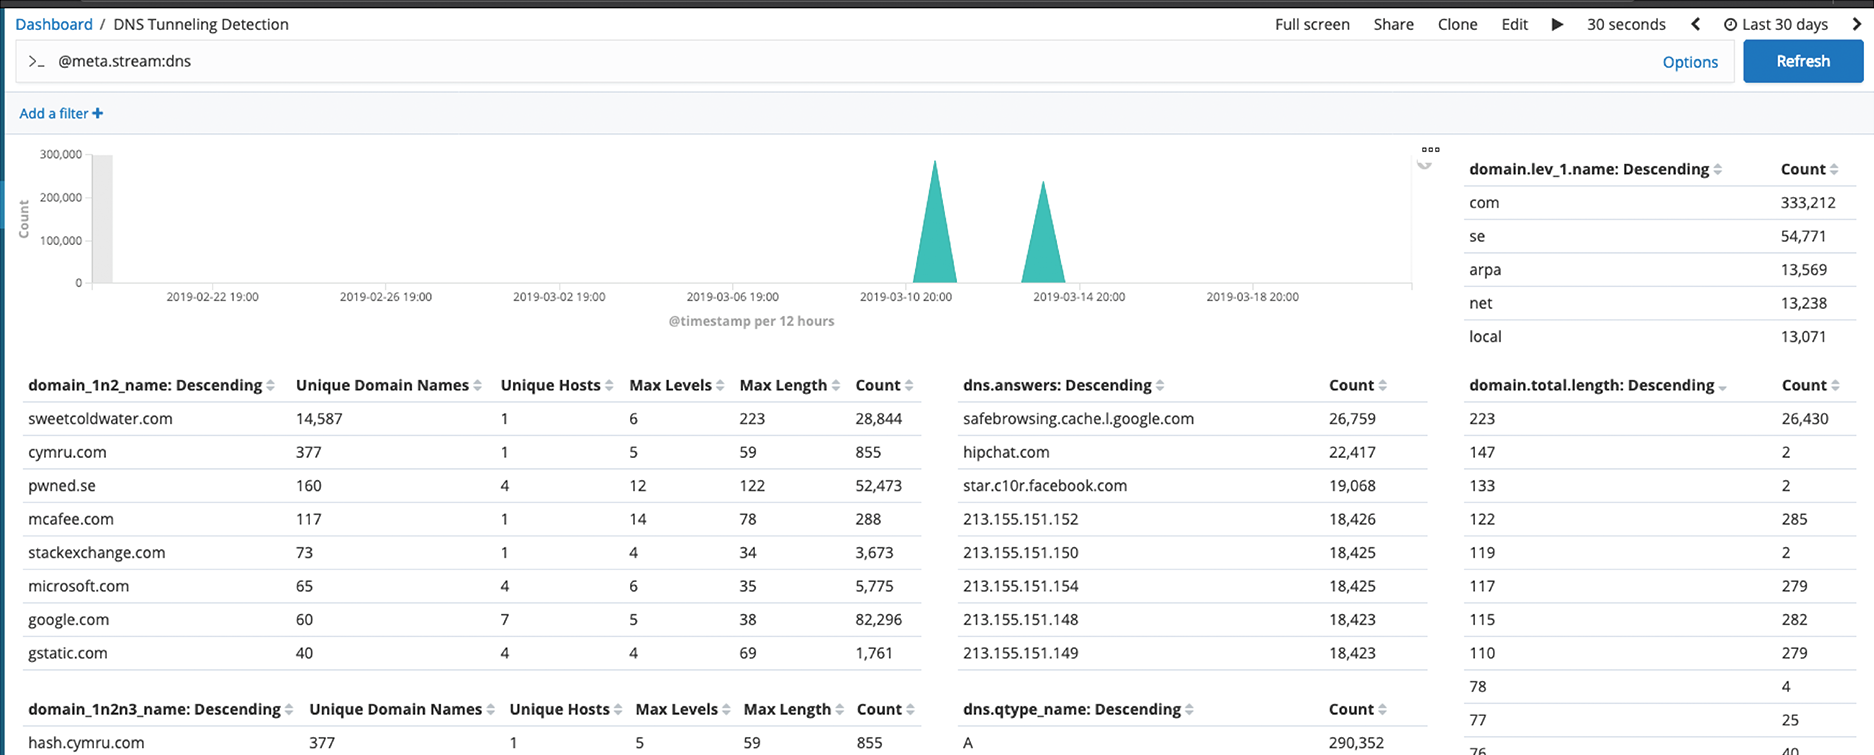 Corelights DNS dashboard in Kibana showing risks like top DNS requests to non-existent domains.